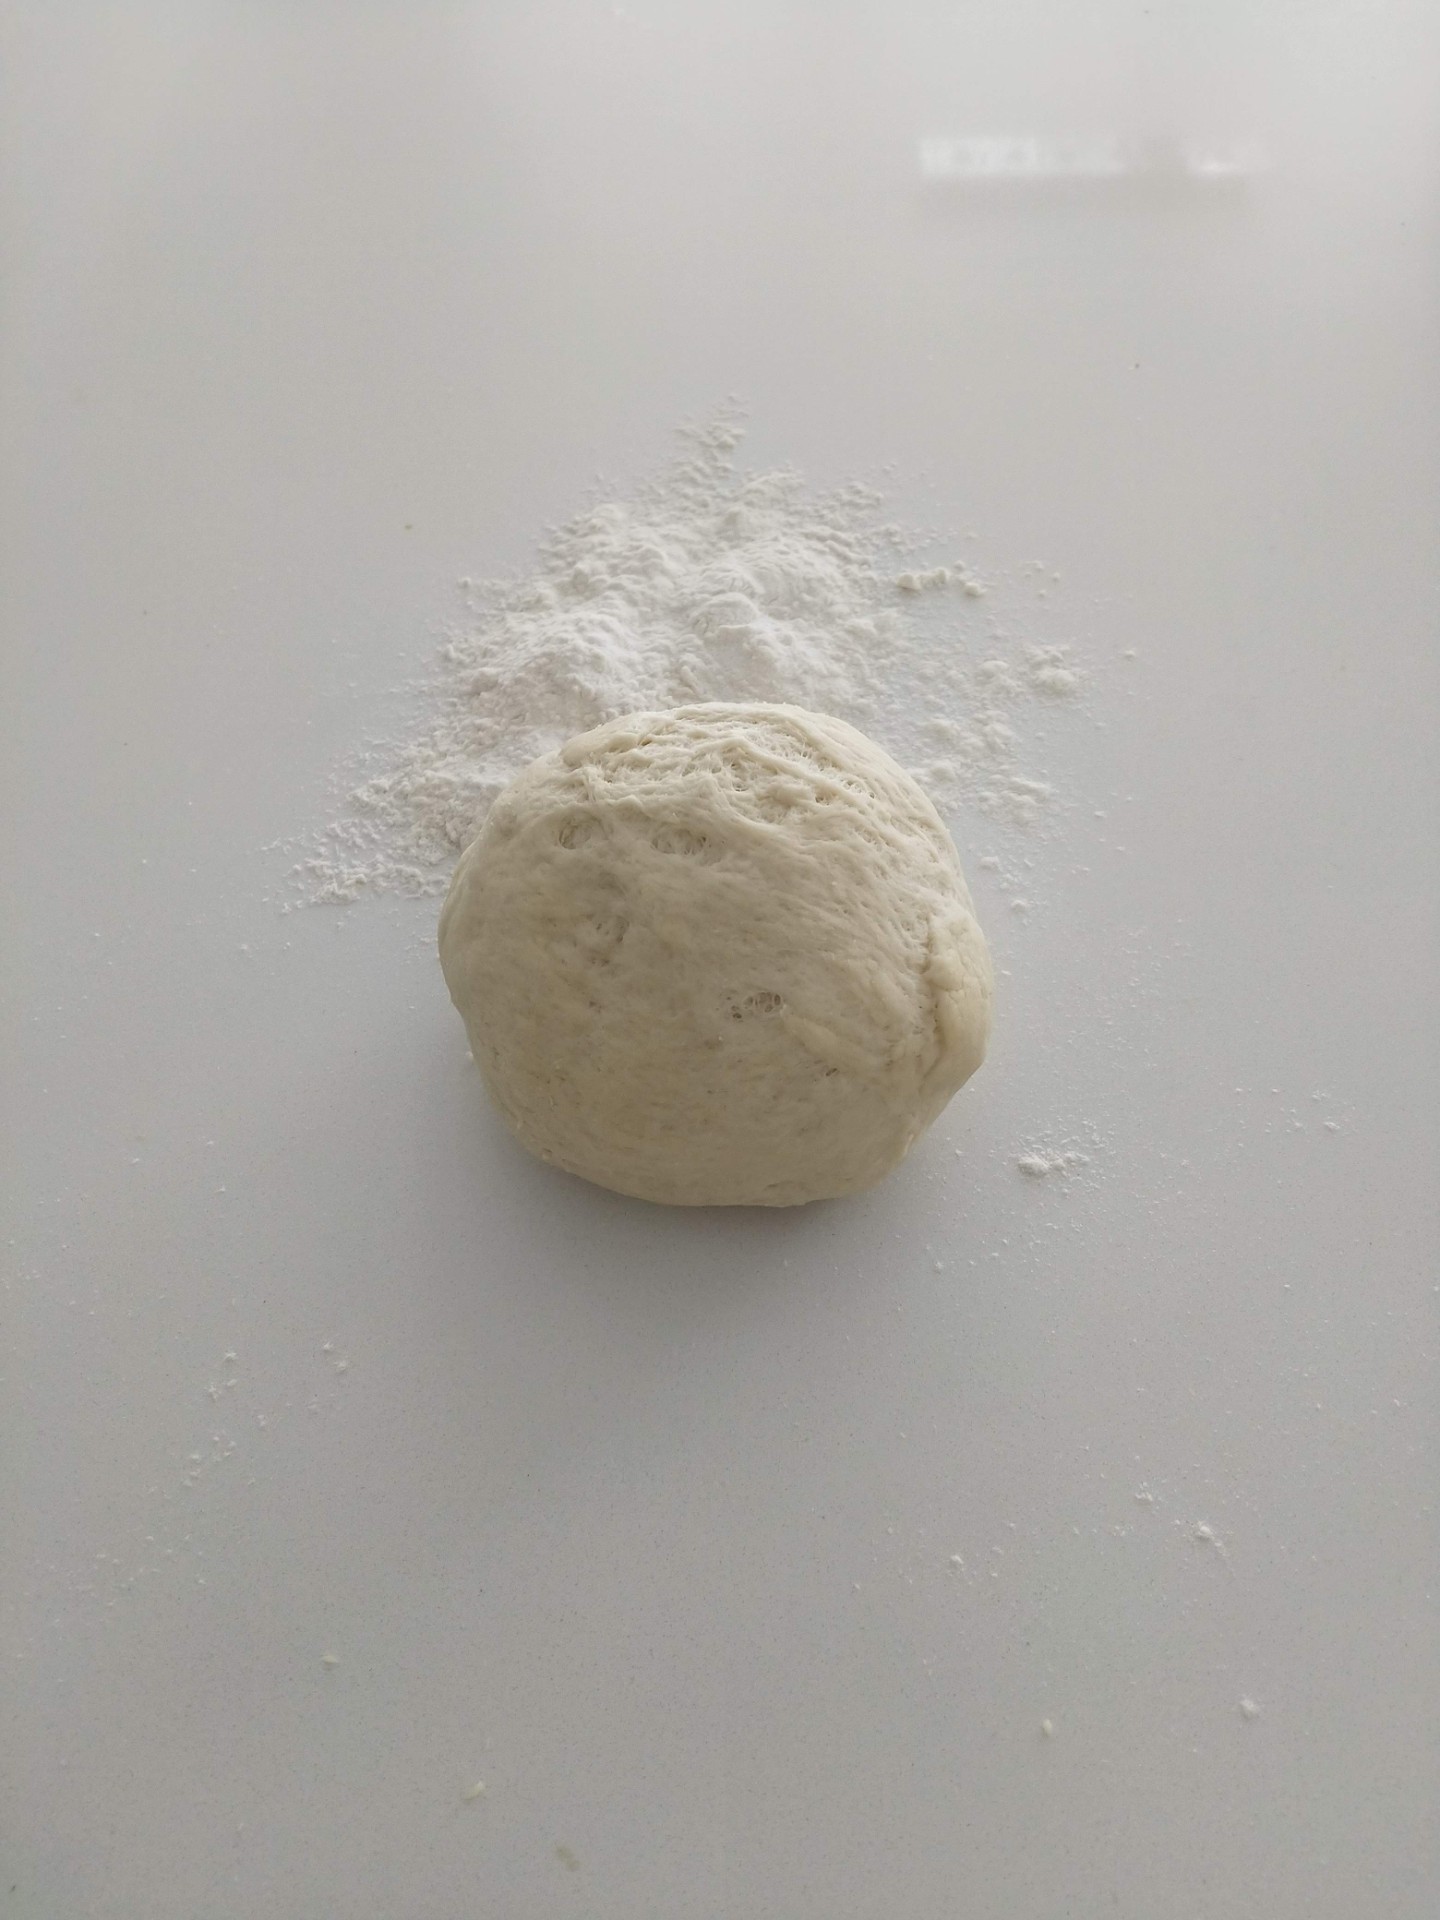 Pizza dough on counter